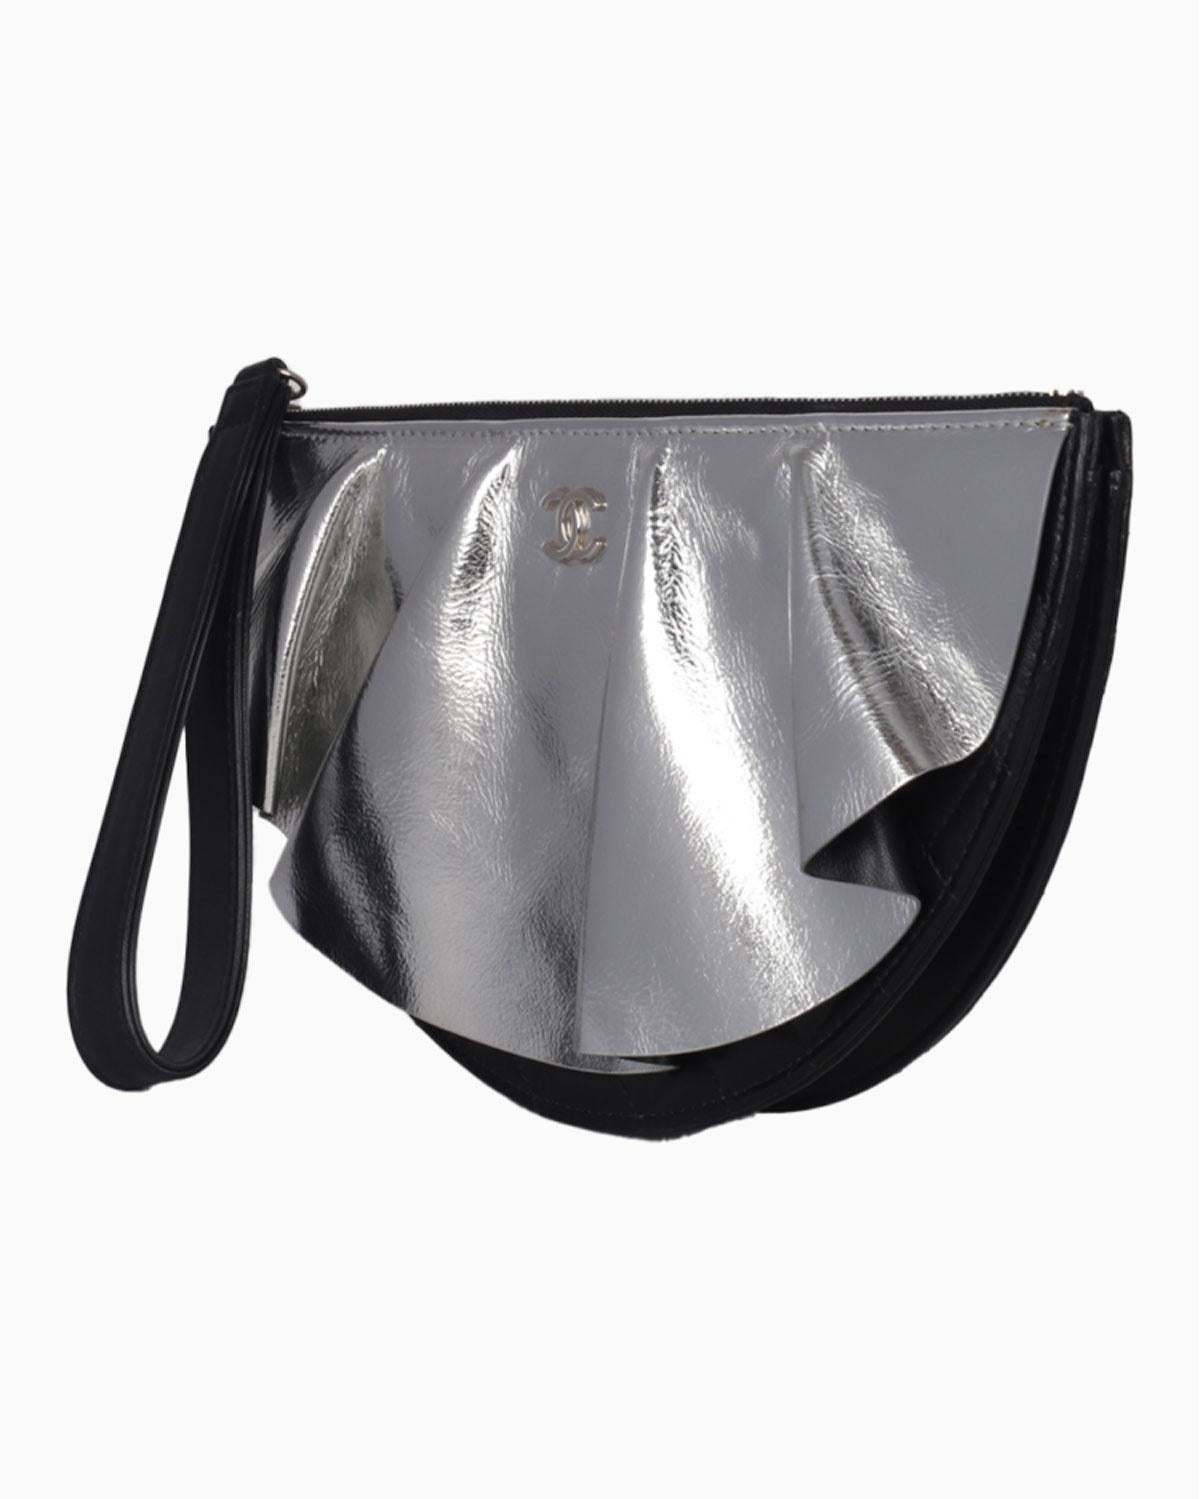 Chanel 2020 Half Circle Wrinkled Metallic Silver Lambskin Quilted Classic Clutch For Sale 2